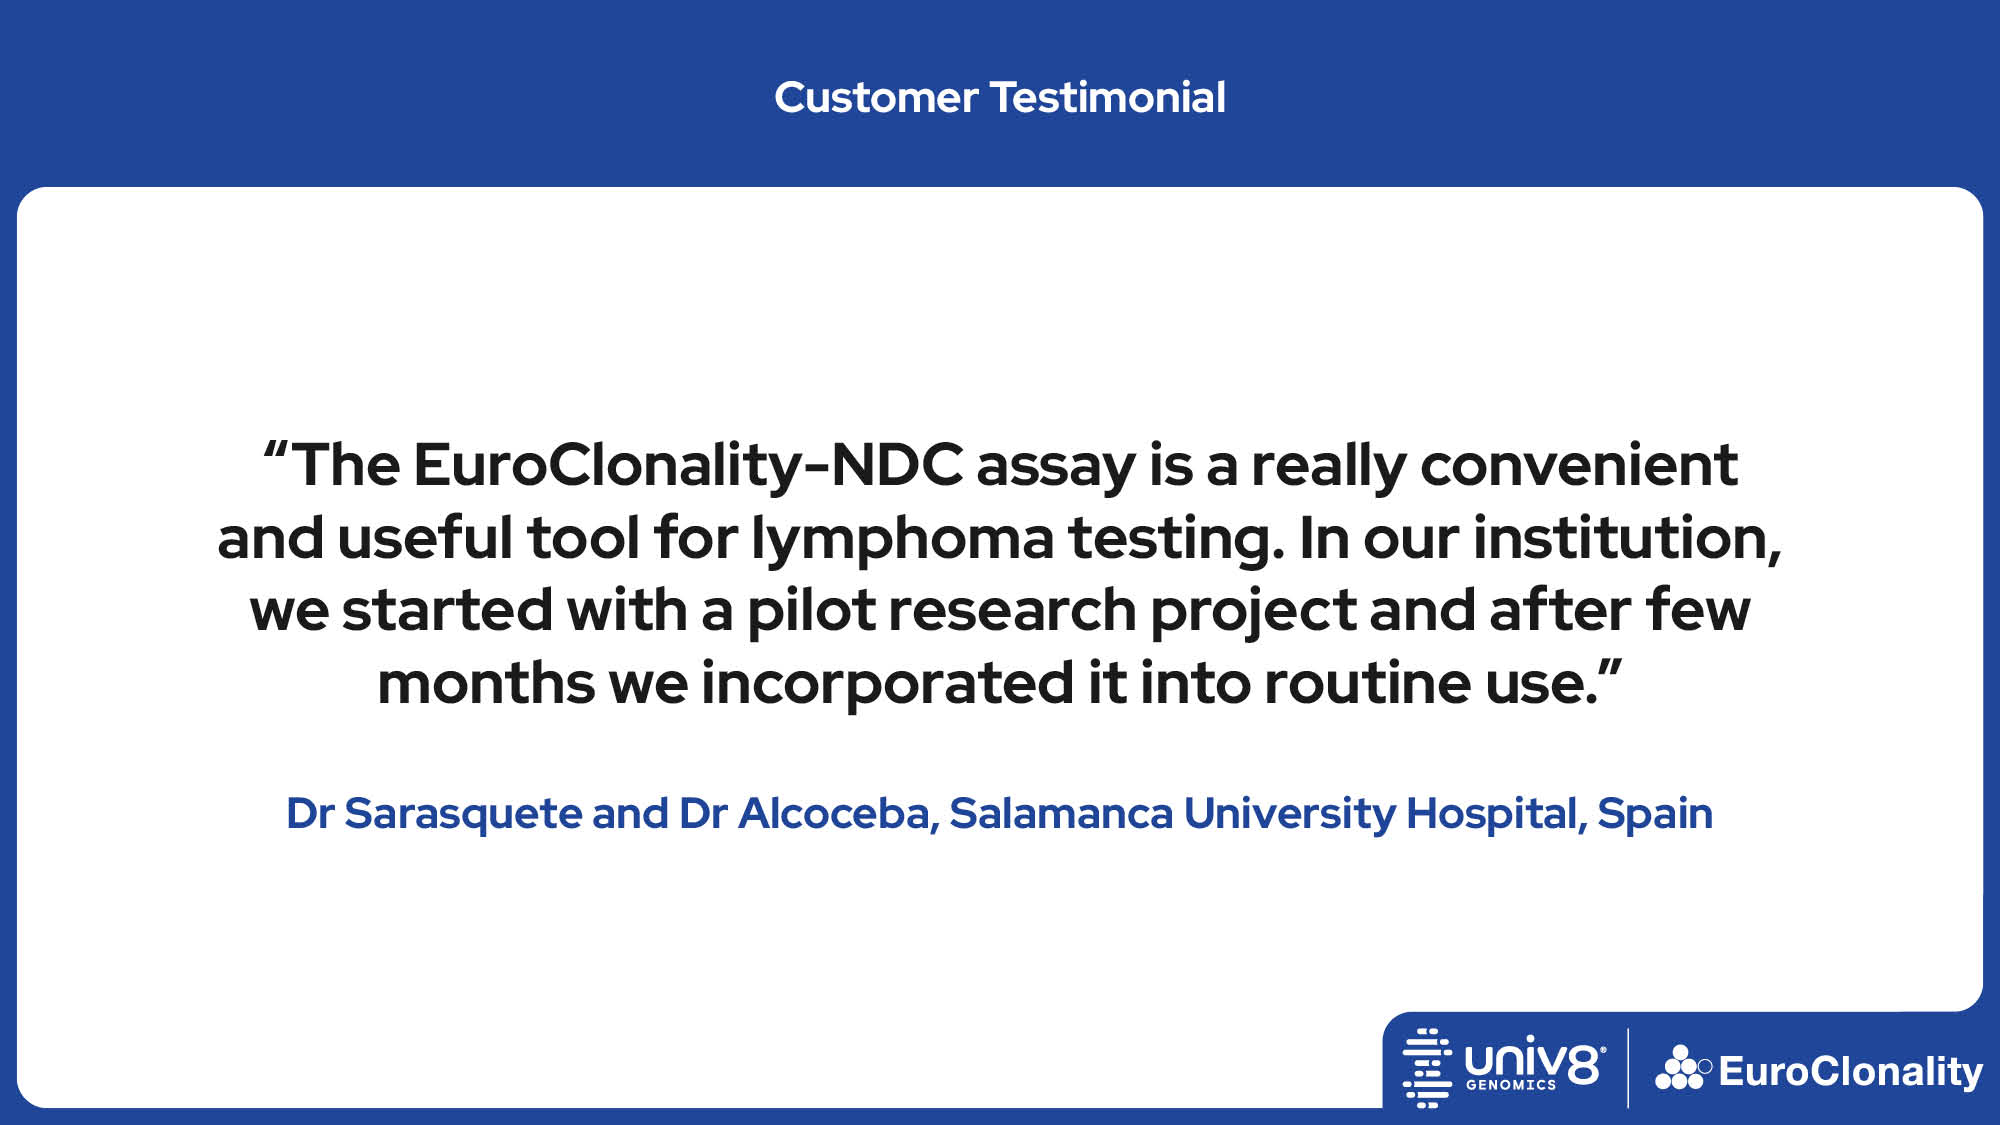 “The EuroClonality-NDC assay is a really convenient and useful tool for lymphoma testing. In our institution, we started with a pilot research project and after few months we incorporated it into routine use.” Dr Sarasquete and Dr Alcoceba, Salamanca University Hospital, Spain